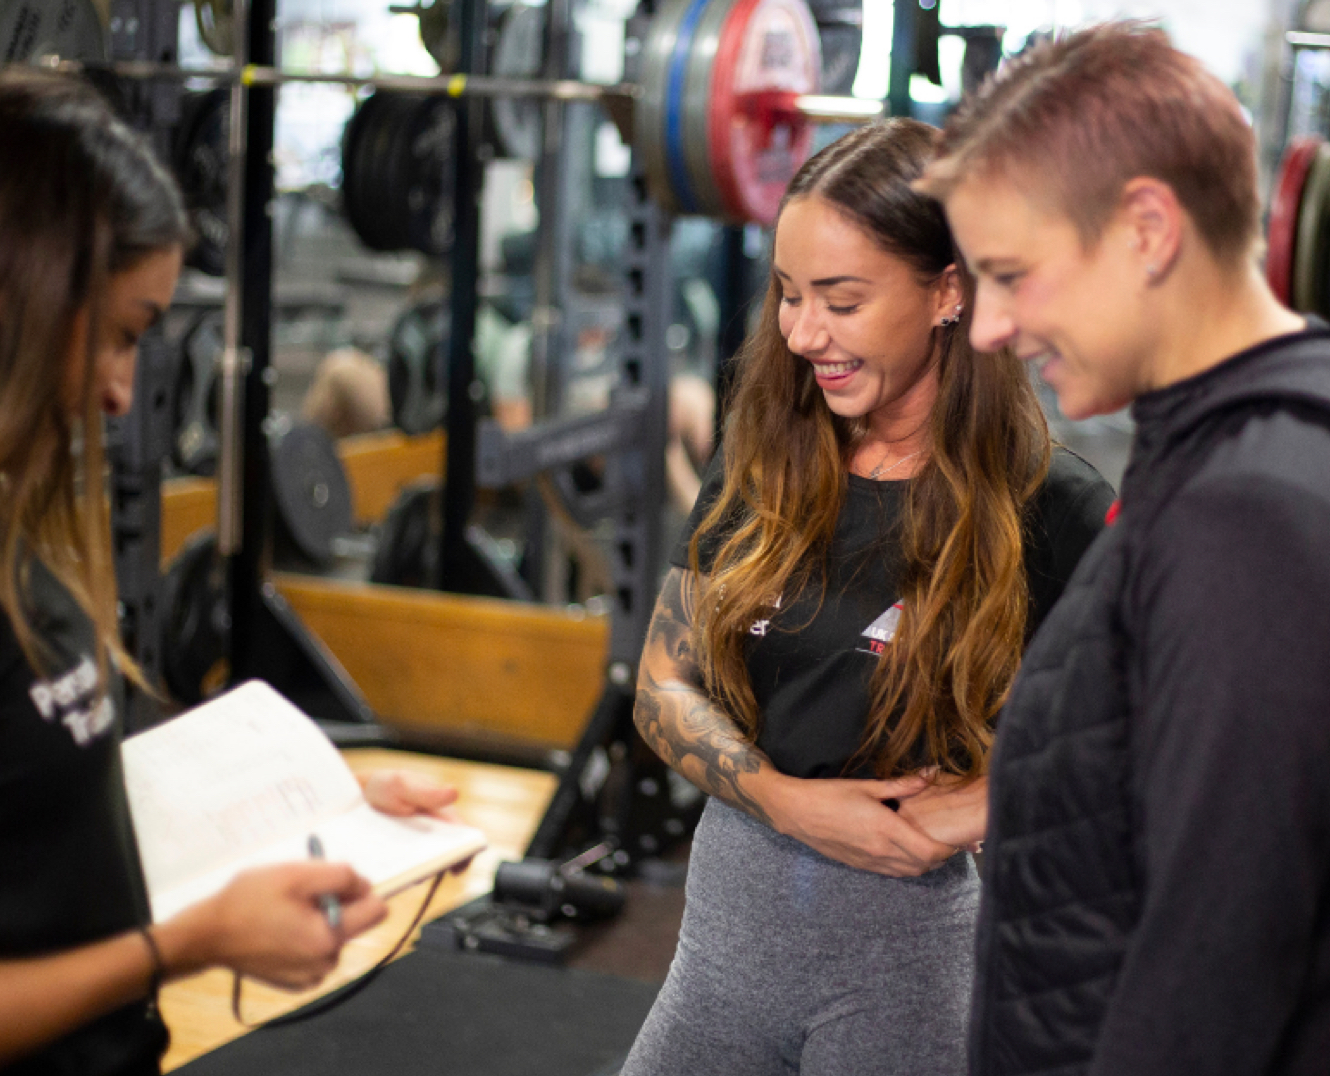 An instructor teaching two people on a fitness instructor course.